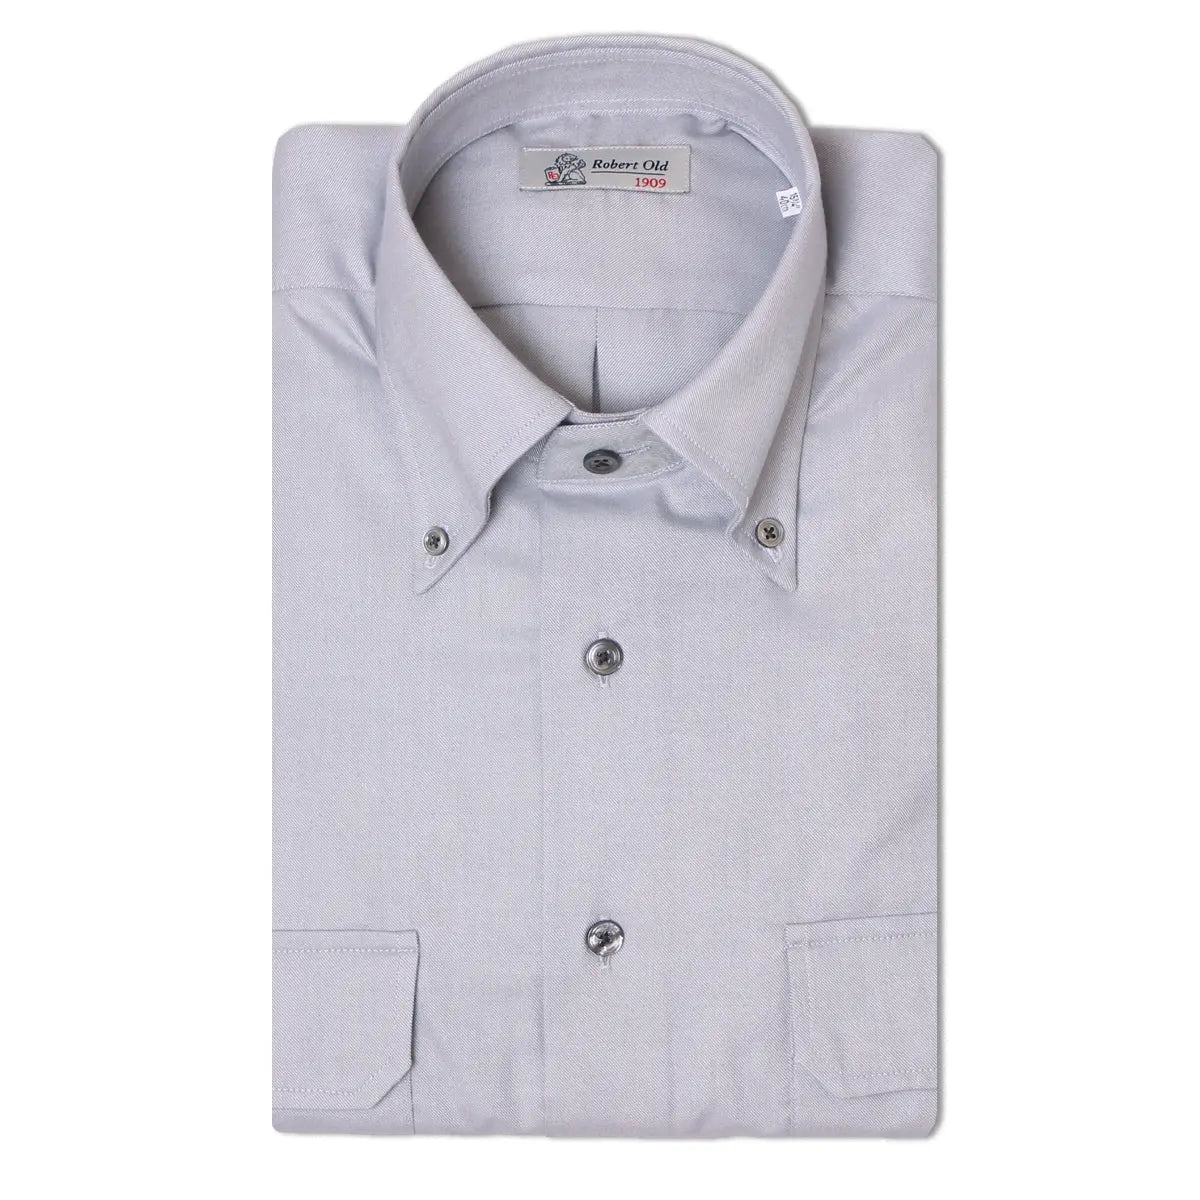 Silver Flanello Cotton Twill Two-Pocket Long Sleeve Shirt  Robert Old   